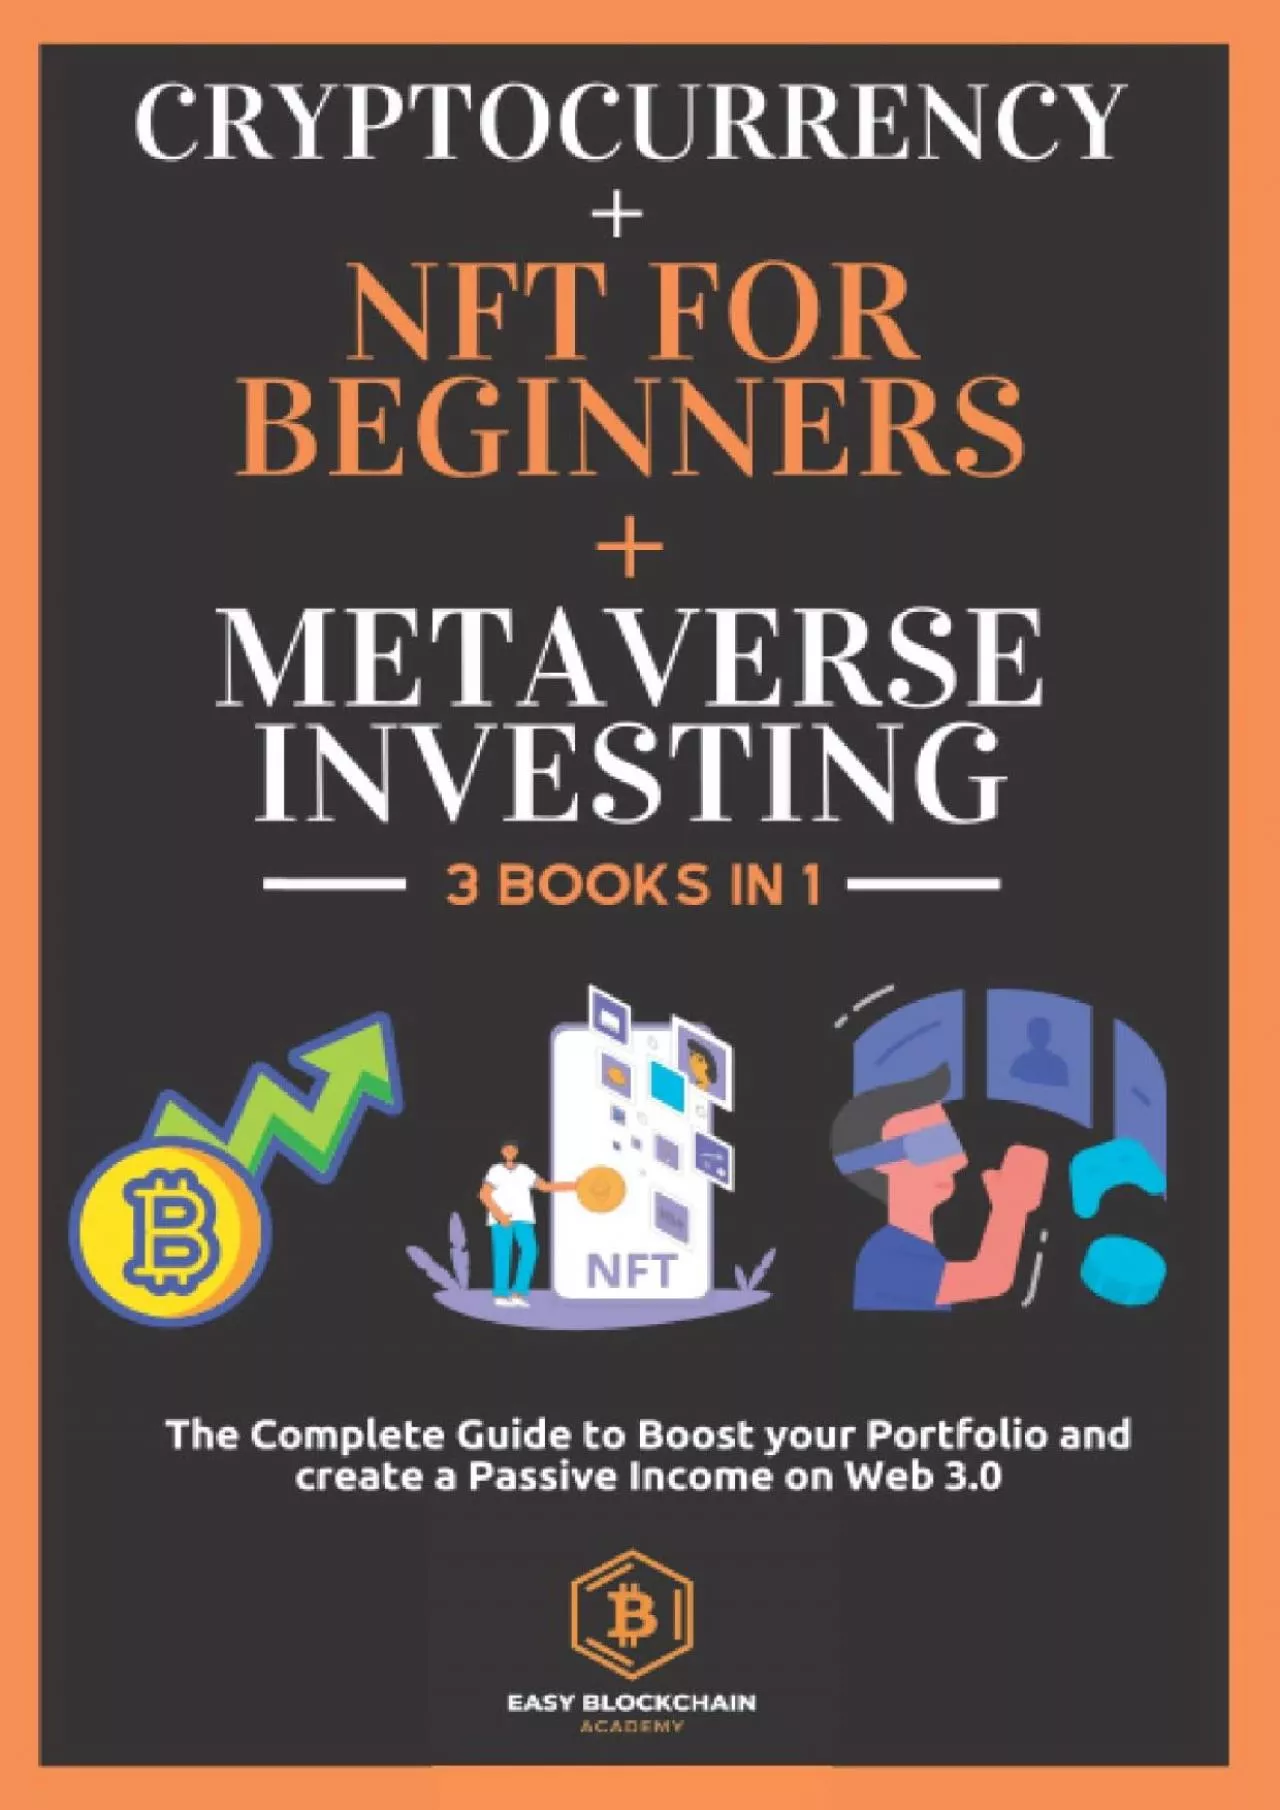 (EBOOK)-Cryptocurrency + NFT for Beginners + Metaverse Investing: The Complete Guide to